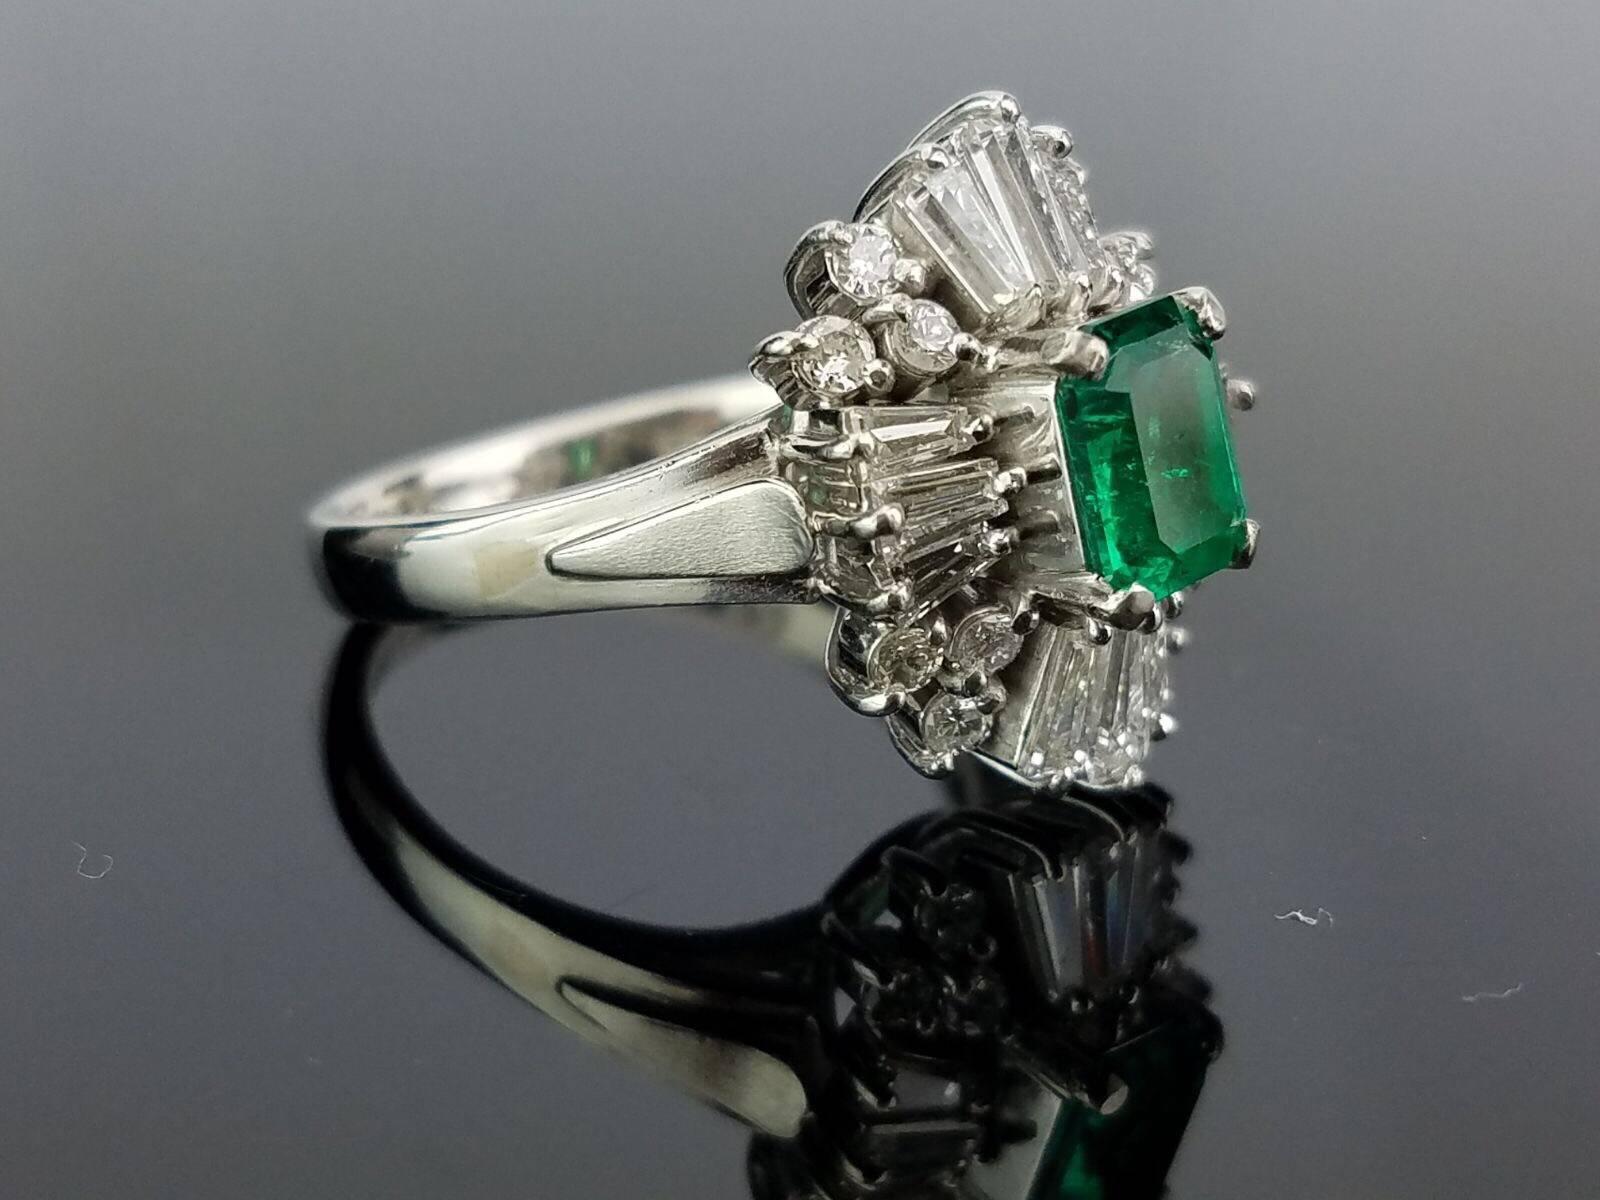 Stone Details: 
Stone: Colombian Emerald
Cut: Emerald cut
Carat Weight: 0.7 Carat

Diamond Details:
Cut: Brilliant / Baguette
Total Carat Weight: 1.07 carat
Quality: VS/SI , H/I

Platinum 900: 7.83 grams 

Can provide certificate upon request. 
Can